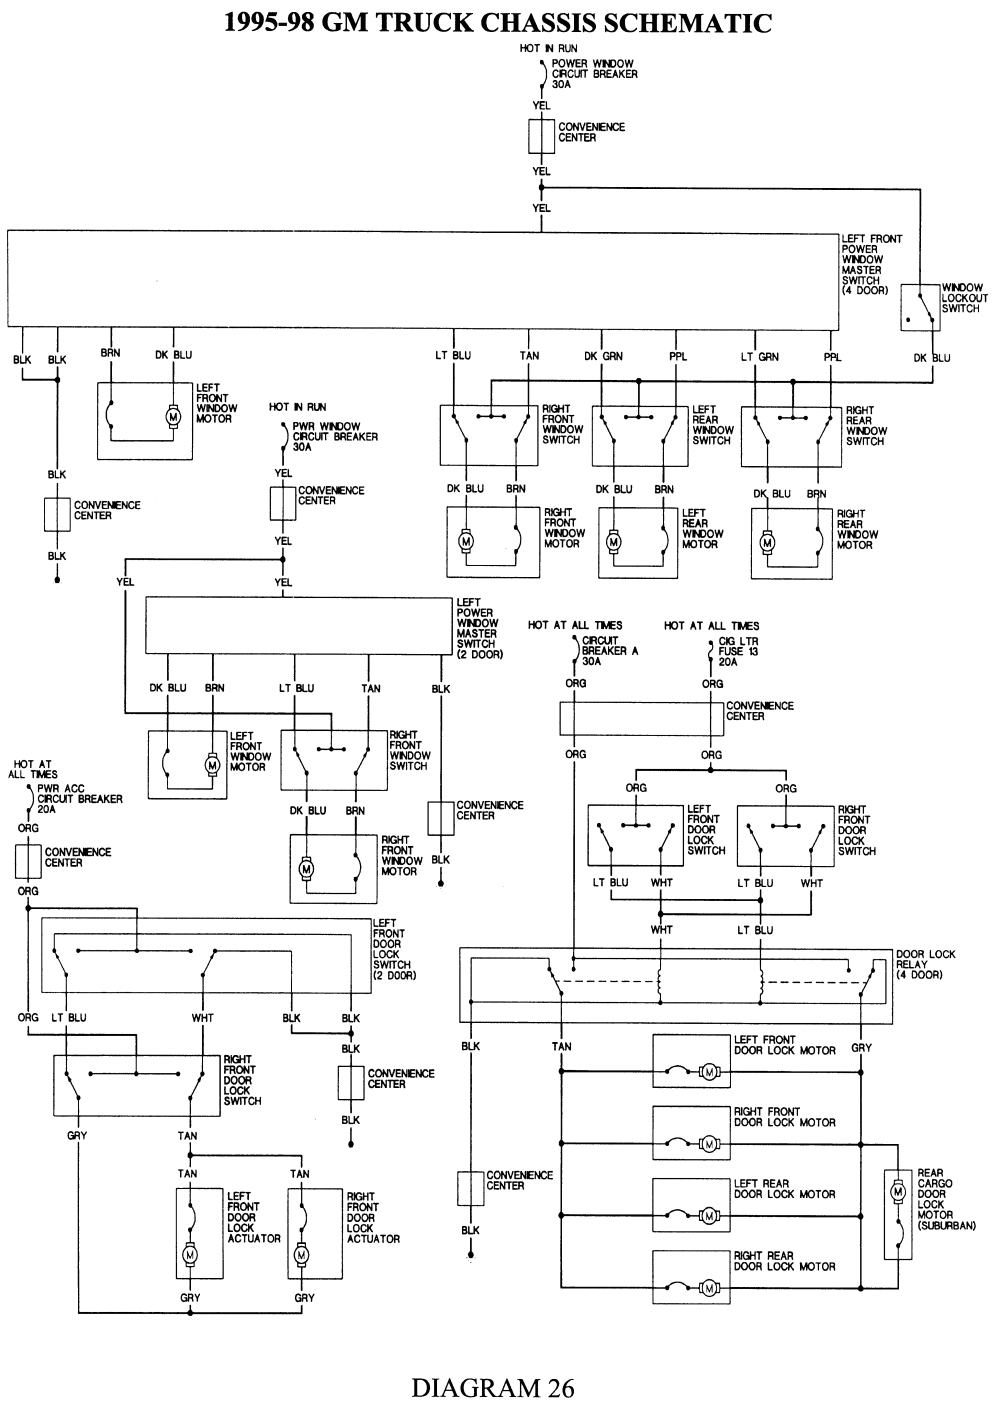 26 1994 gm truck chassis schematic click image to see an enlarged view fig